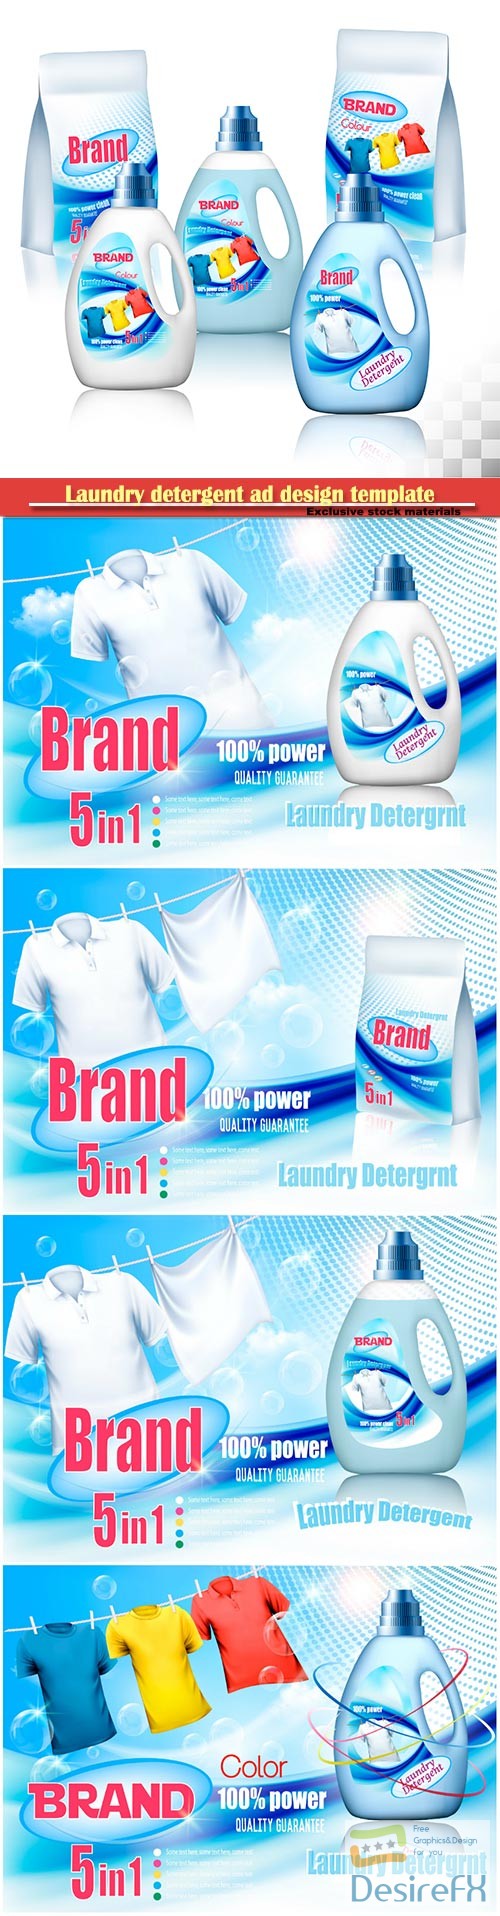 Laundry detergent ad design template, plastic bottle and colorful shirts on rope